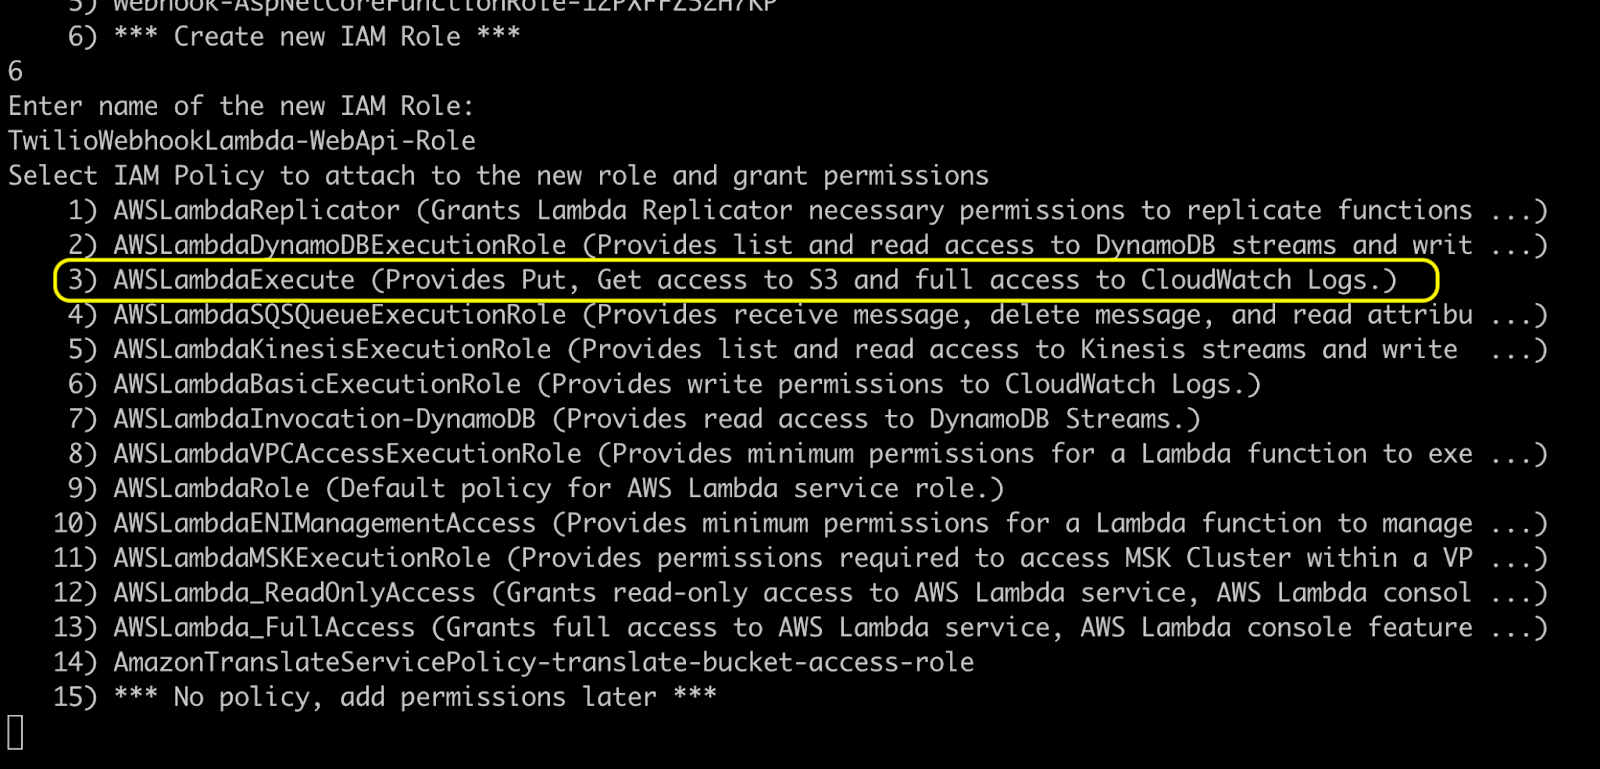 Terminal window showing a list of IAM policies to select from including "3) AWSLambdaExecute (Provides Put, Get access to S3 and full access to CloudWatch logs.)